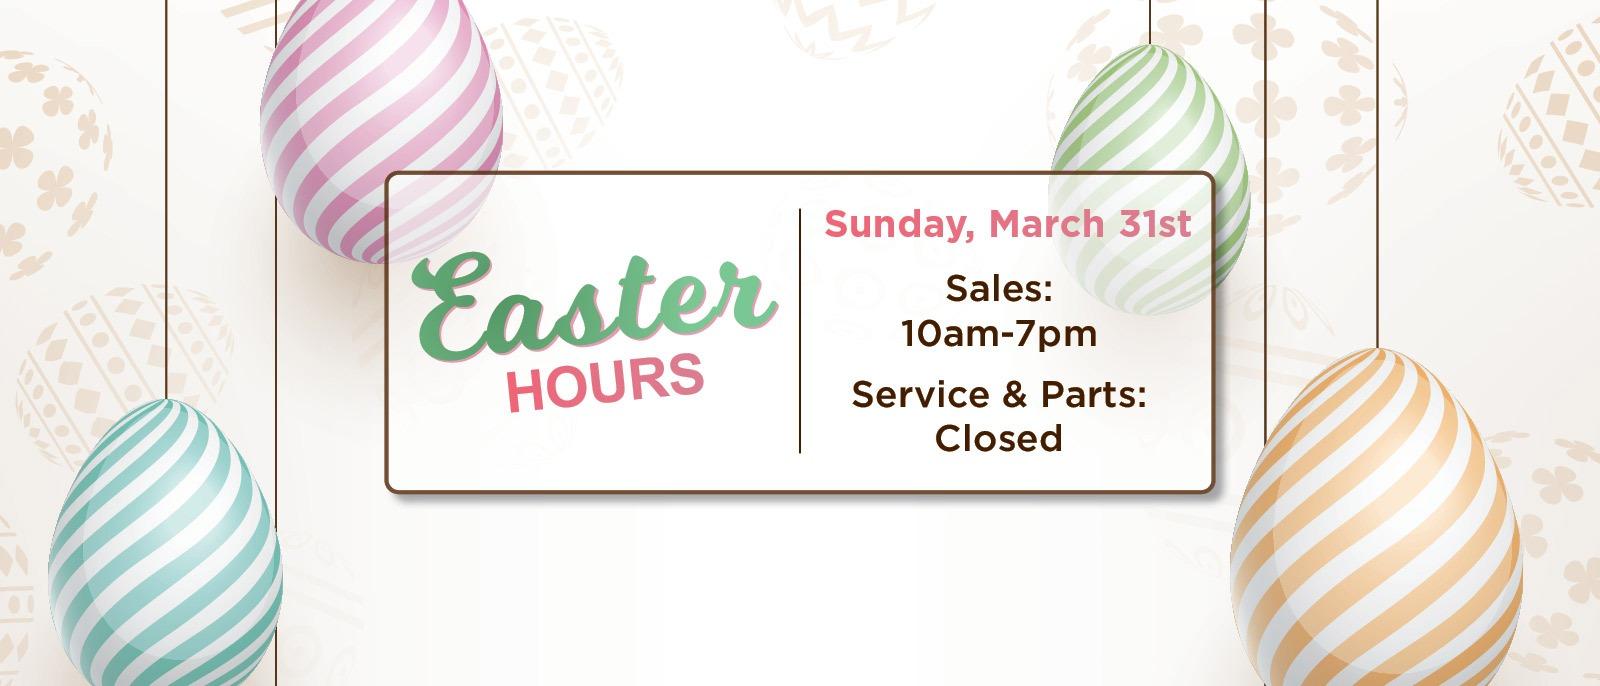 Sunday, March 31st 
Sales : 10am-7pm 
Service & Parts : Closed